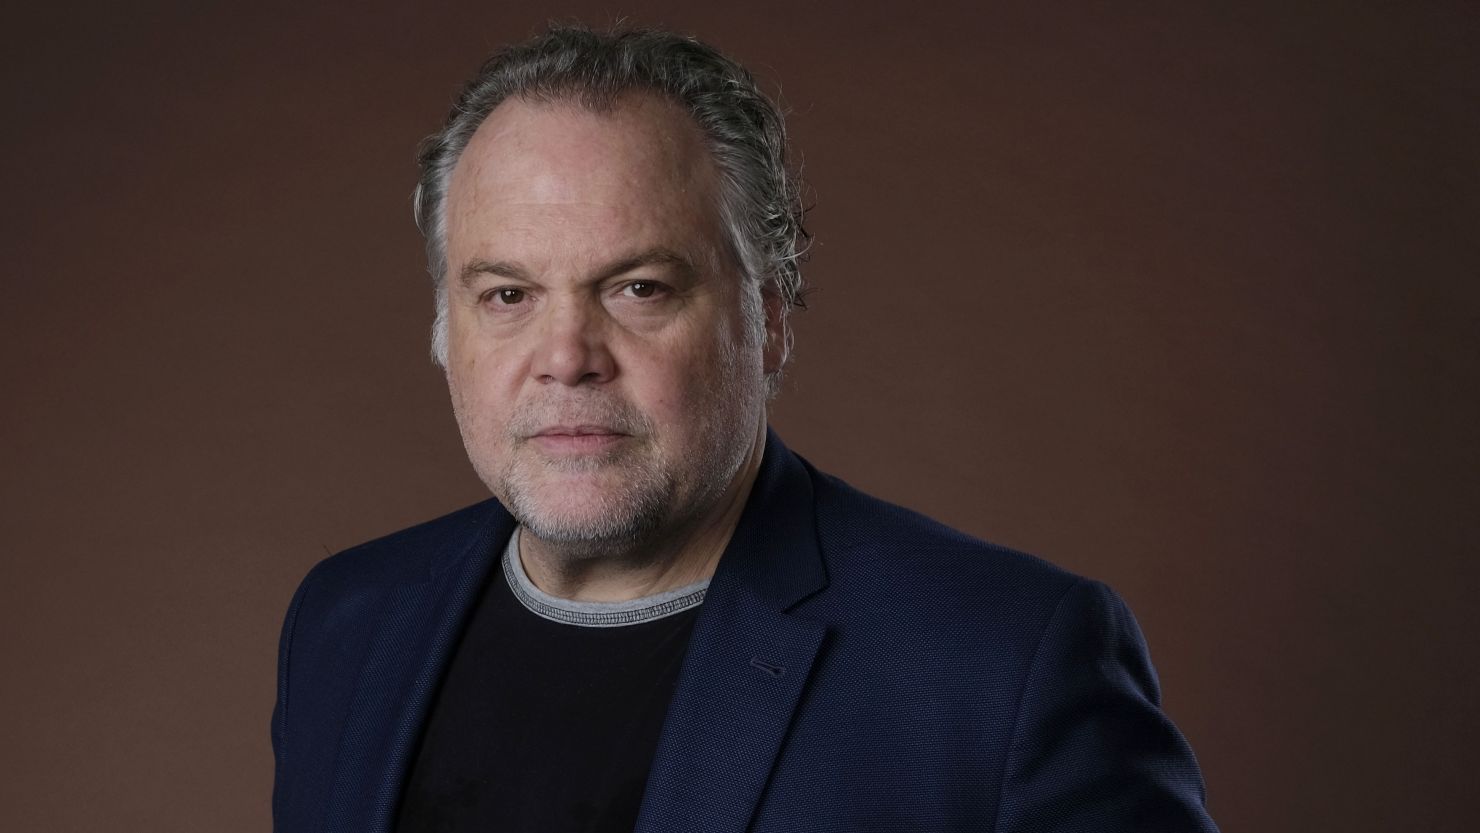 Vincent D'Onofrio, a cast member in the Epix series "Godfather of Harlem," poses for a portrait during the 2019 Television Critics Association Summer Press Tour at the Beverly Hilton, Saturday, July 27, 2019, in Beverly Hills, Calif.